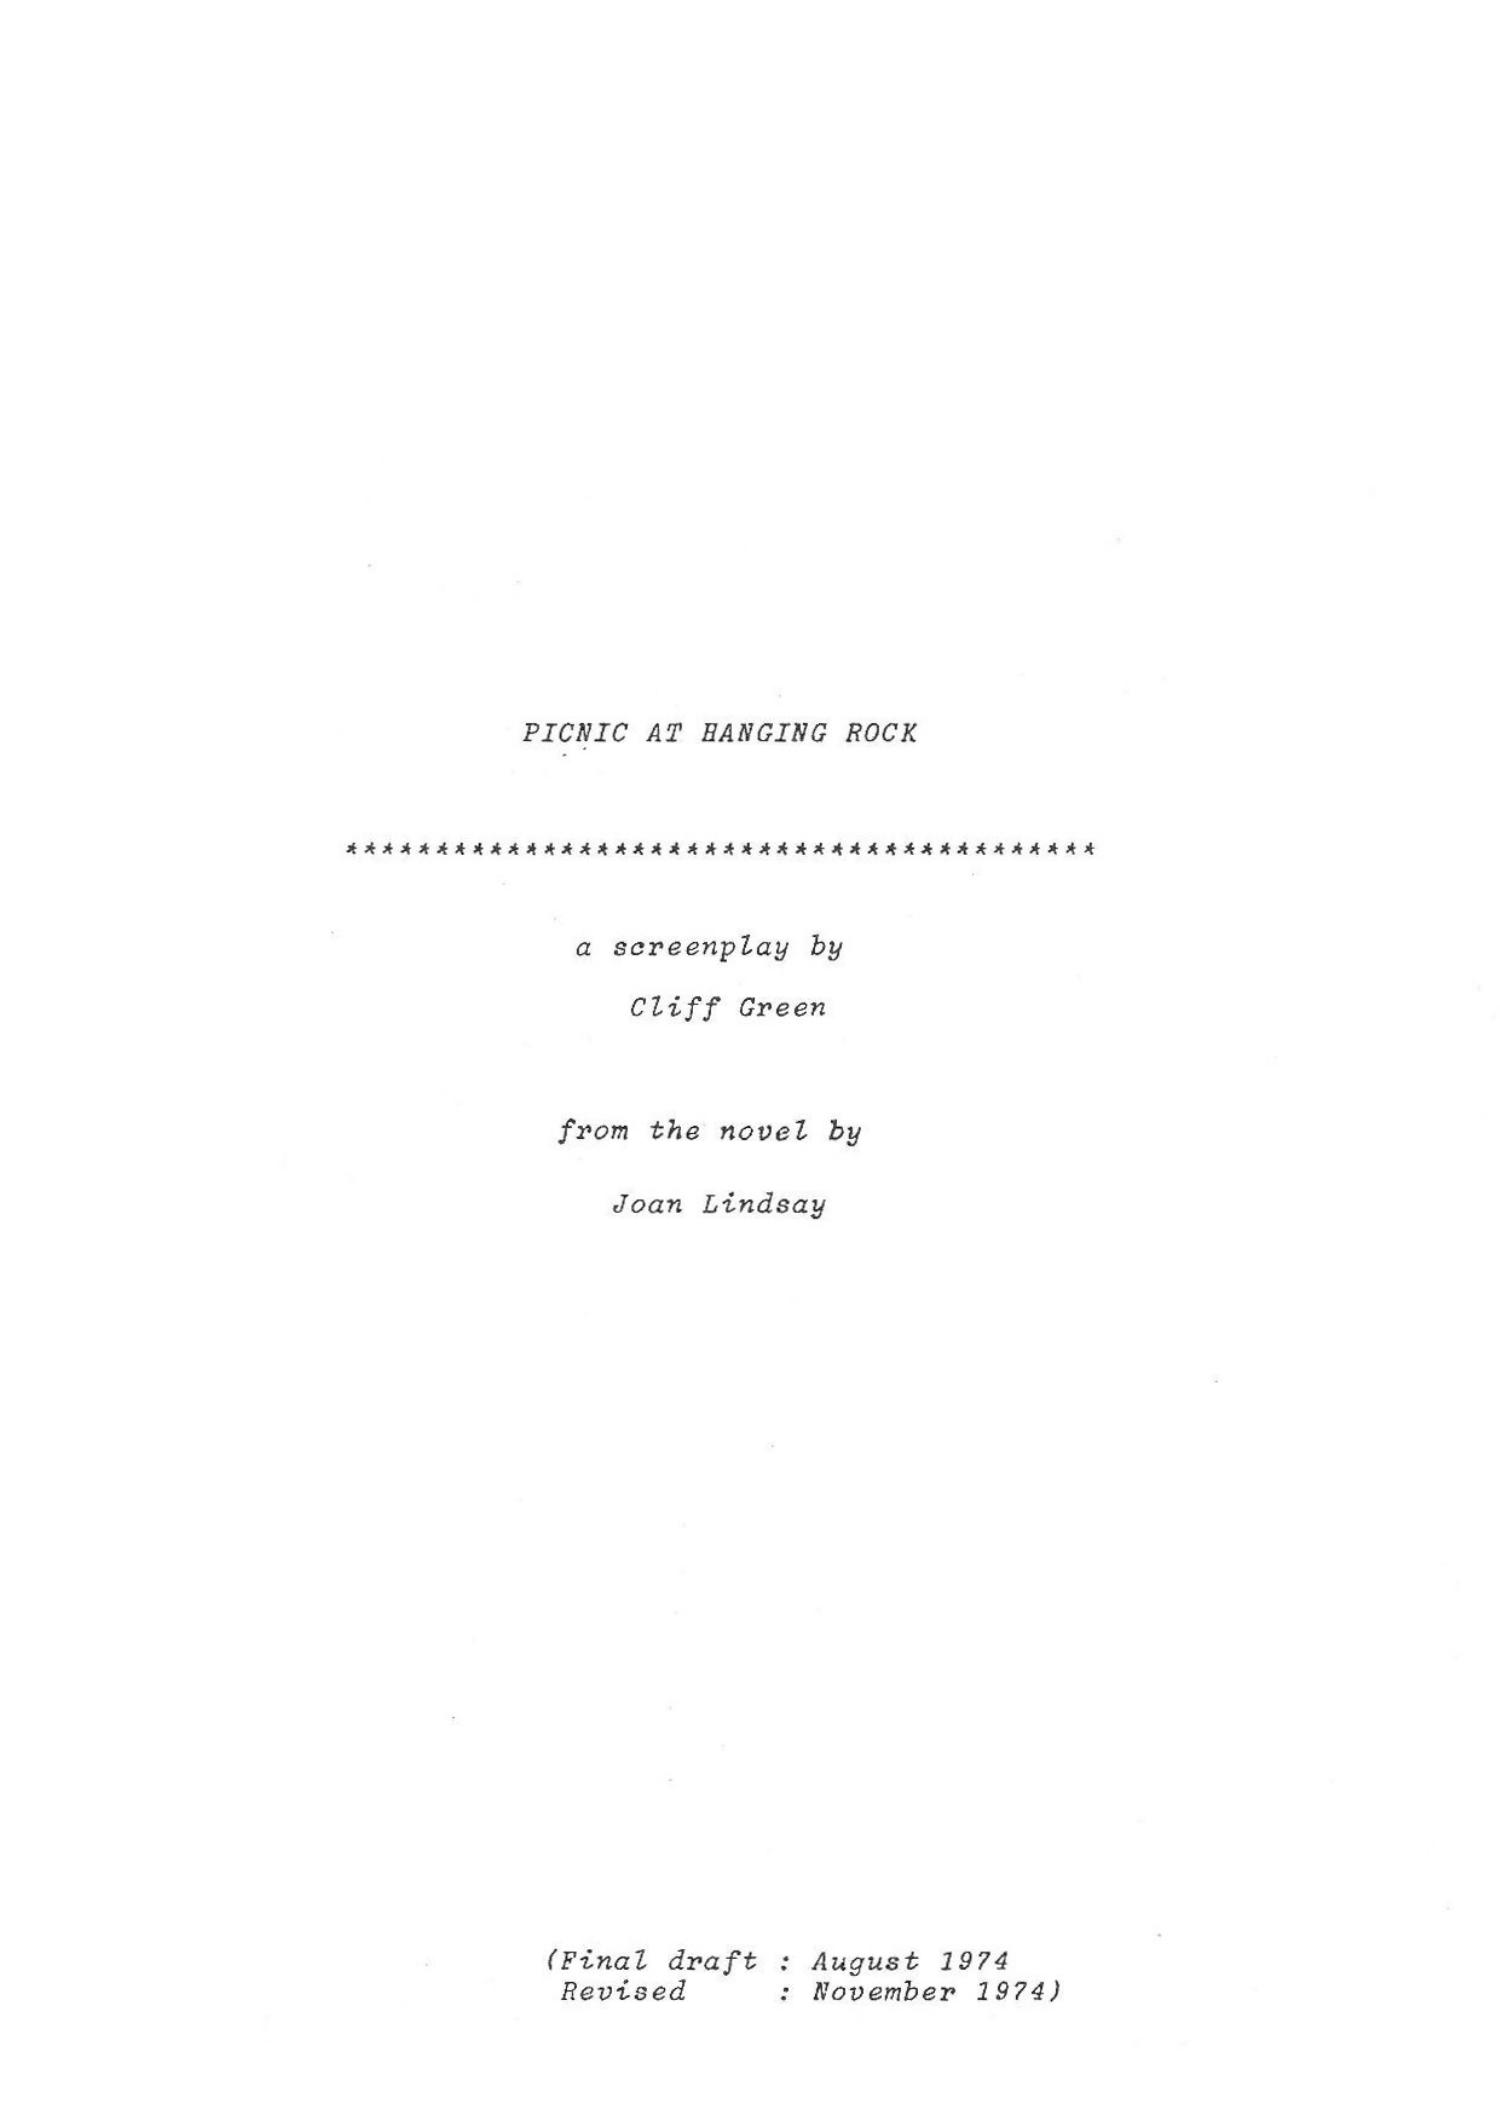 Picnic at Hanging Rock screenplay (Cliff Green).pdf | DocDroid